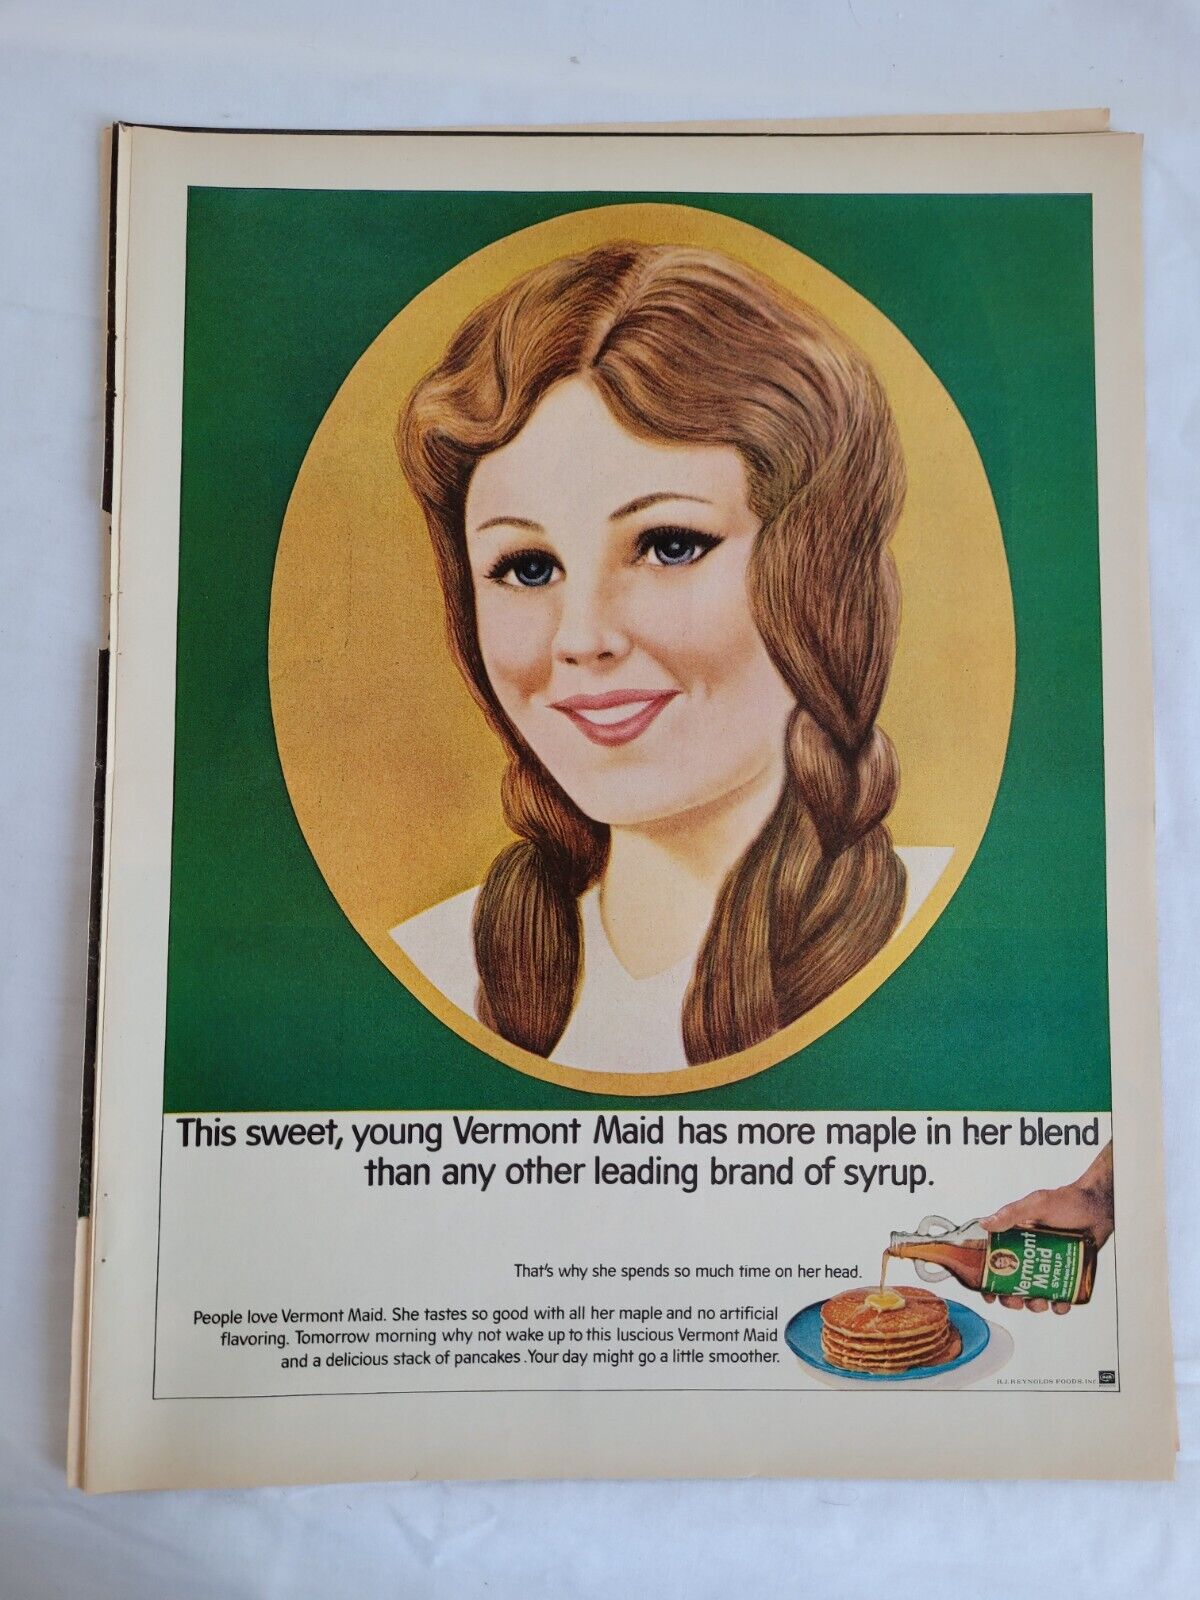 VTG 1967 Orig Magazine Ad Sweet Young Vermont Maid Syrup Has More Maple